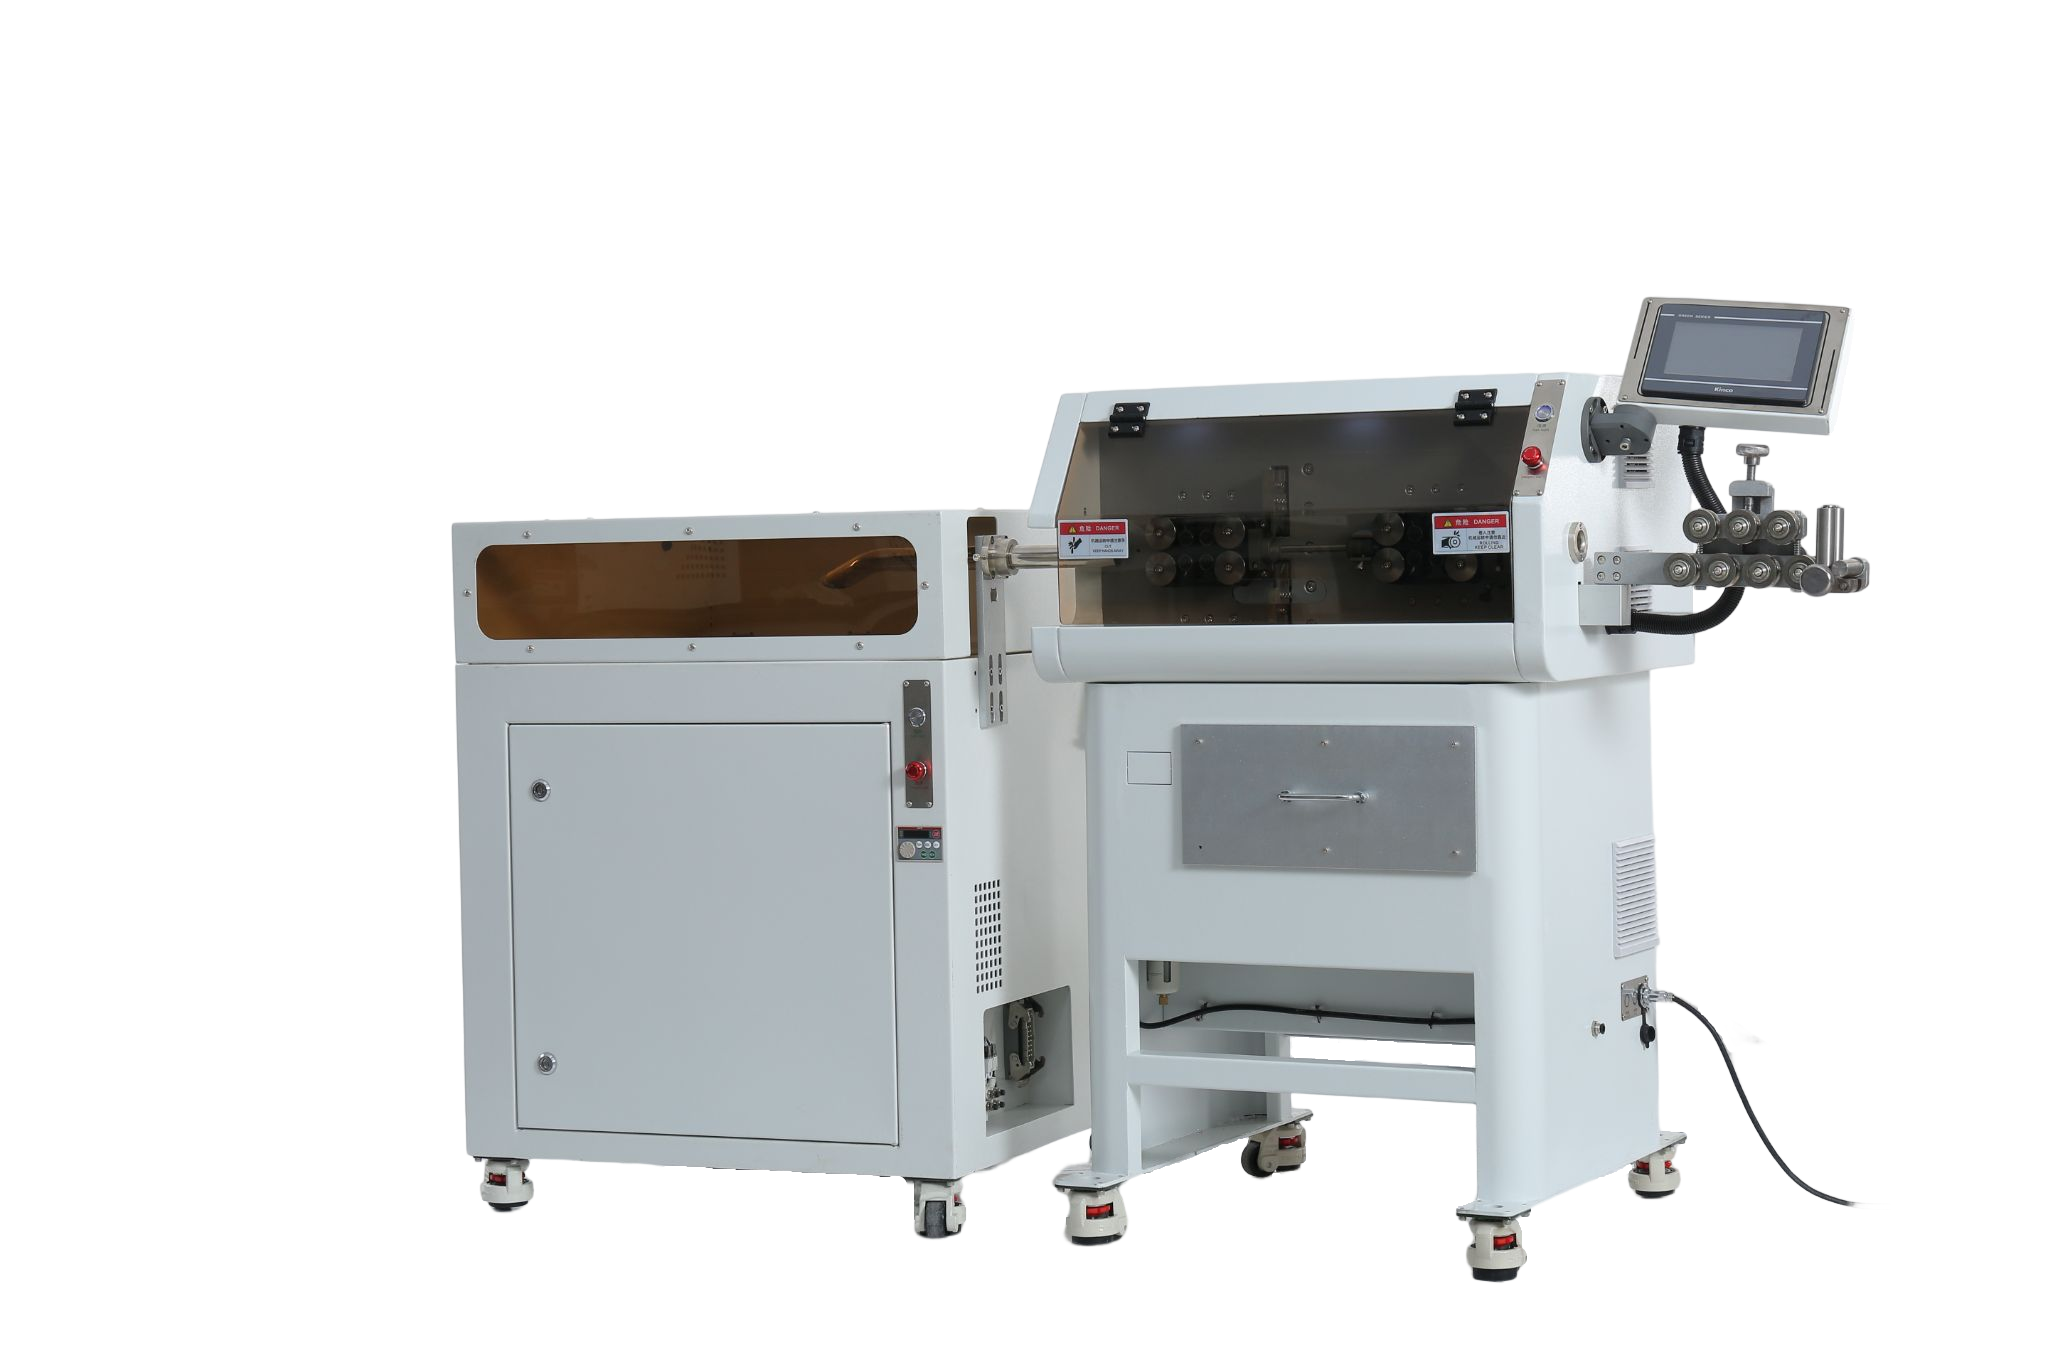 The new automatic tape stripping + cutting machine with winding system makes a shocking debut